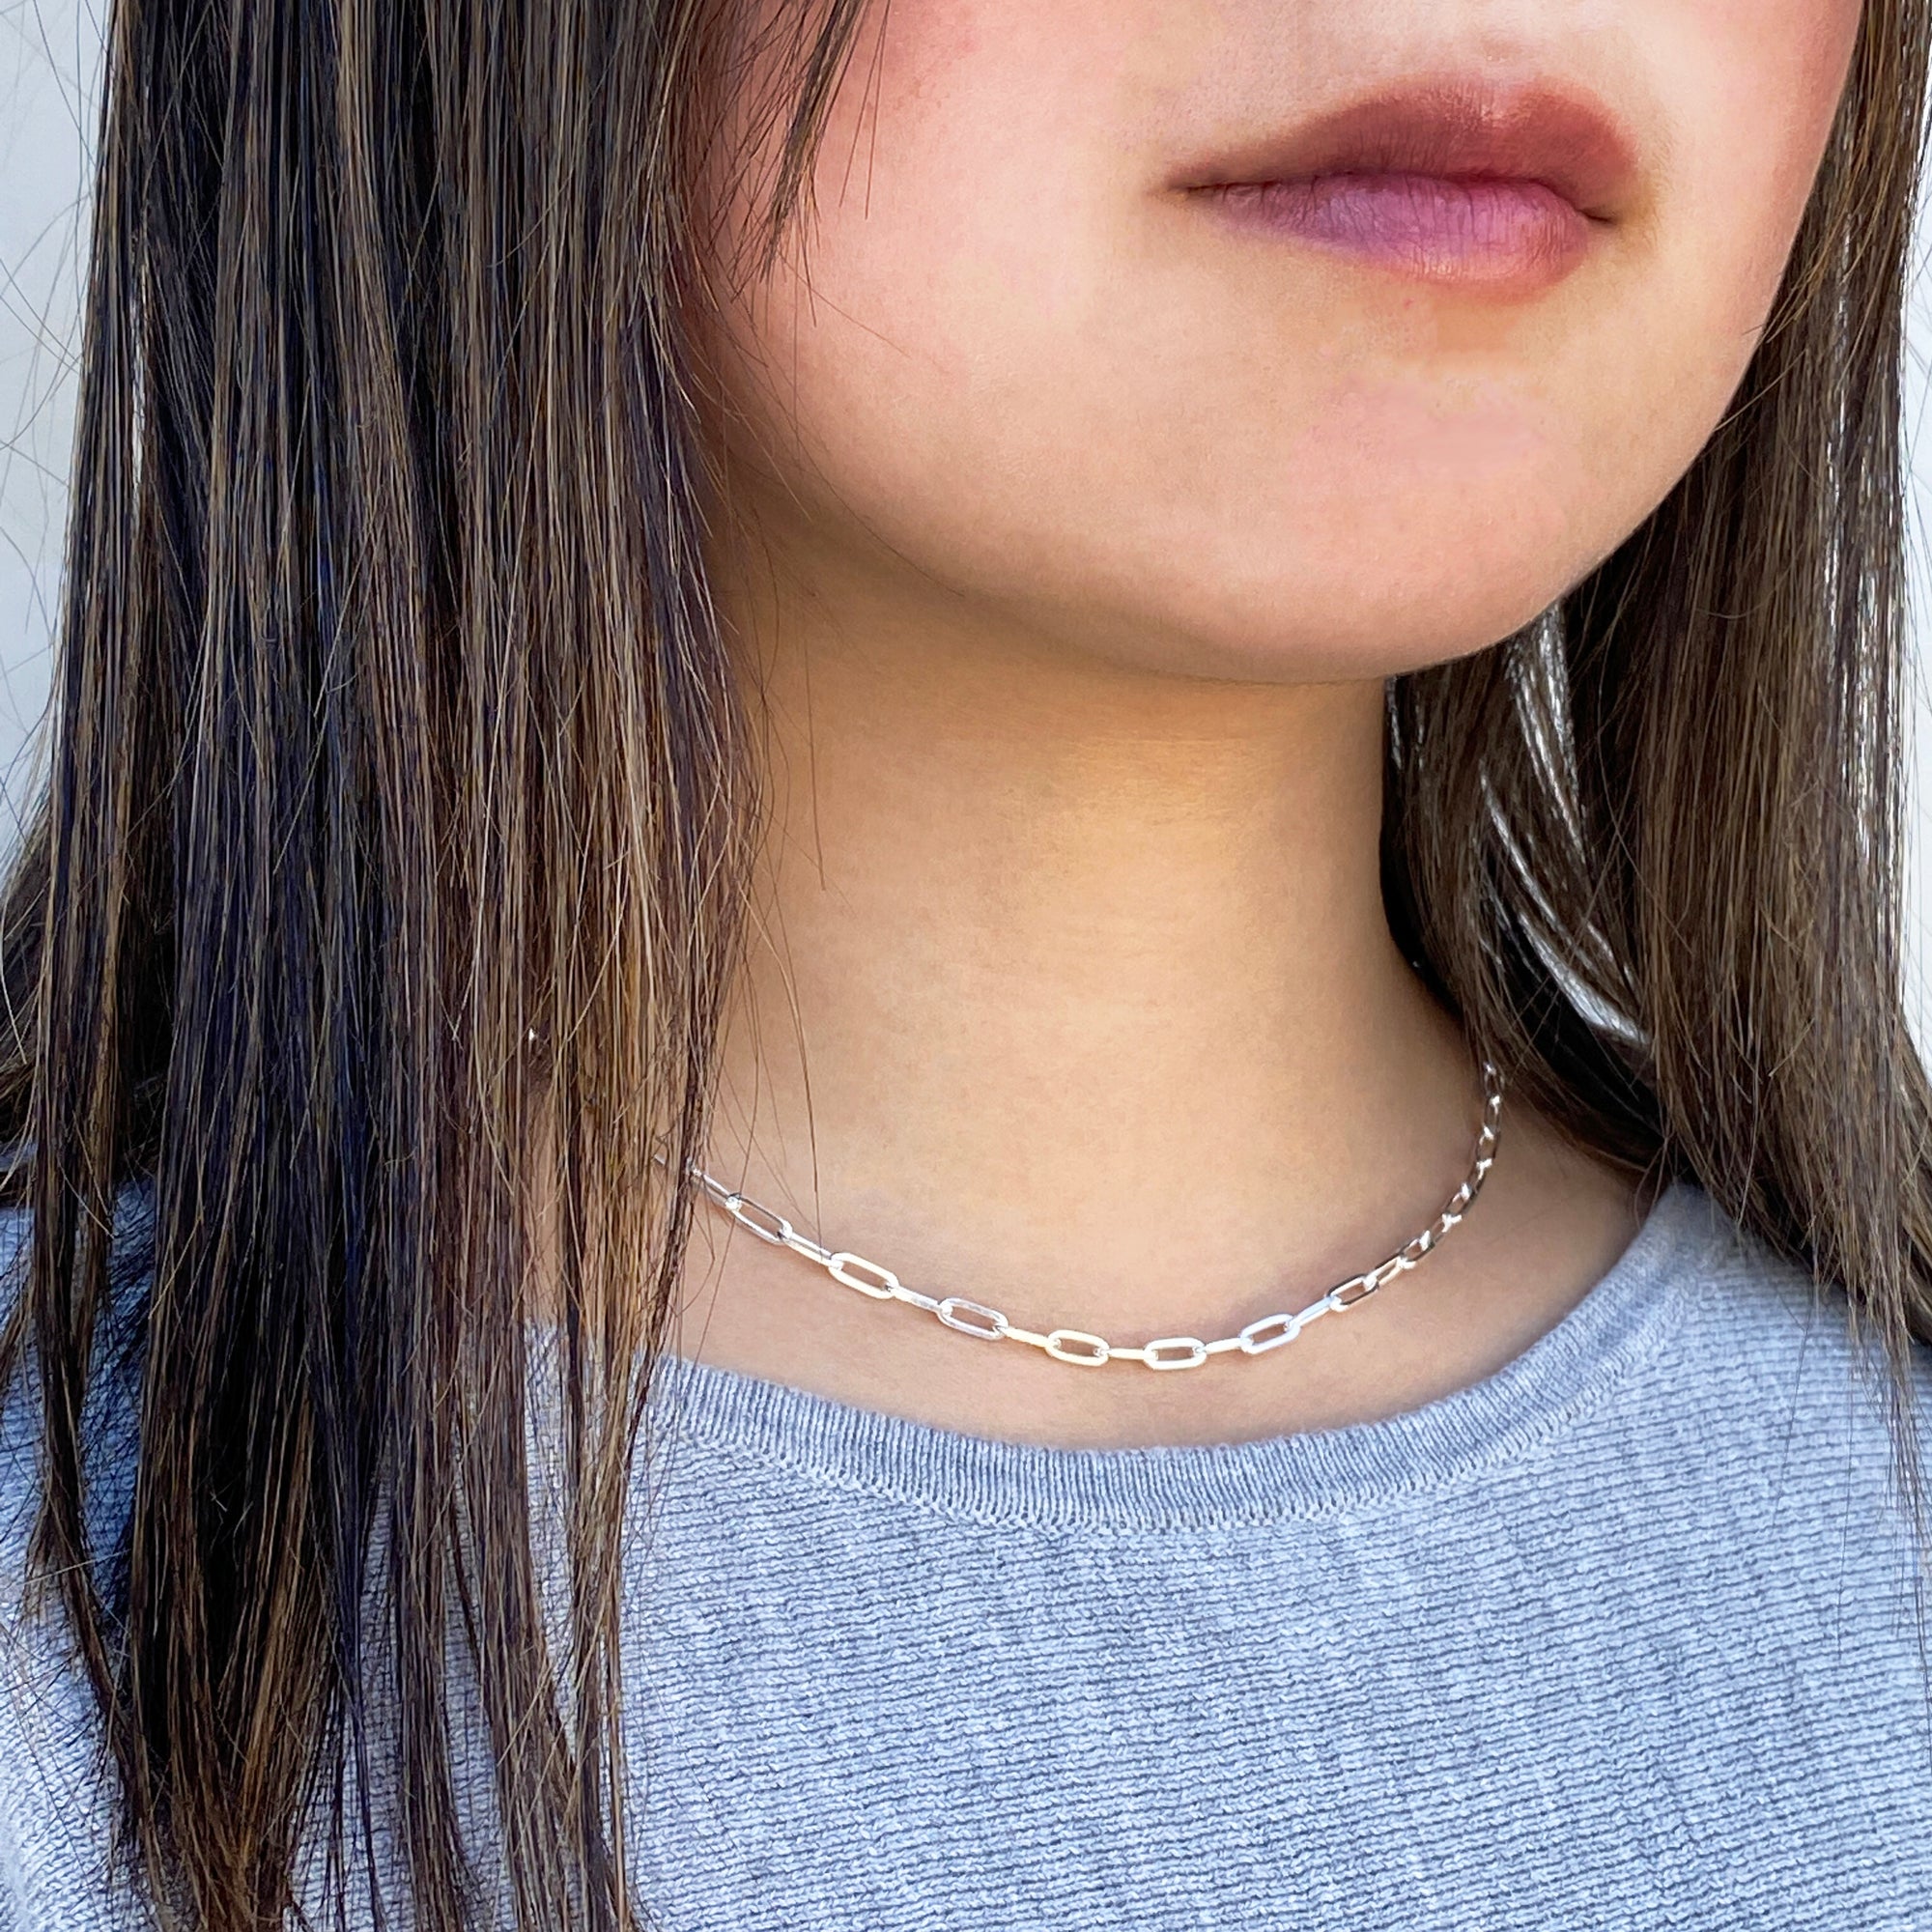 women wearing sparkling sterling silver necklace